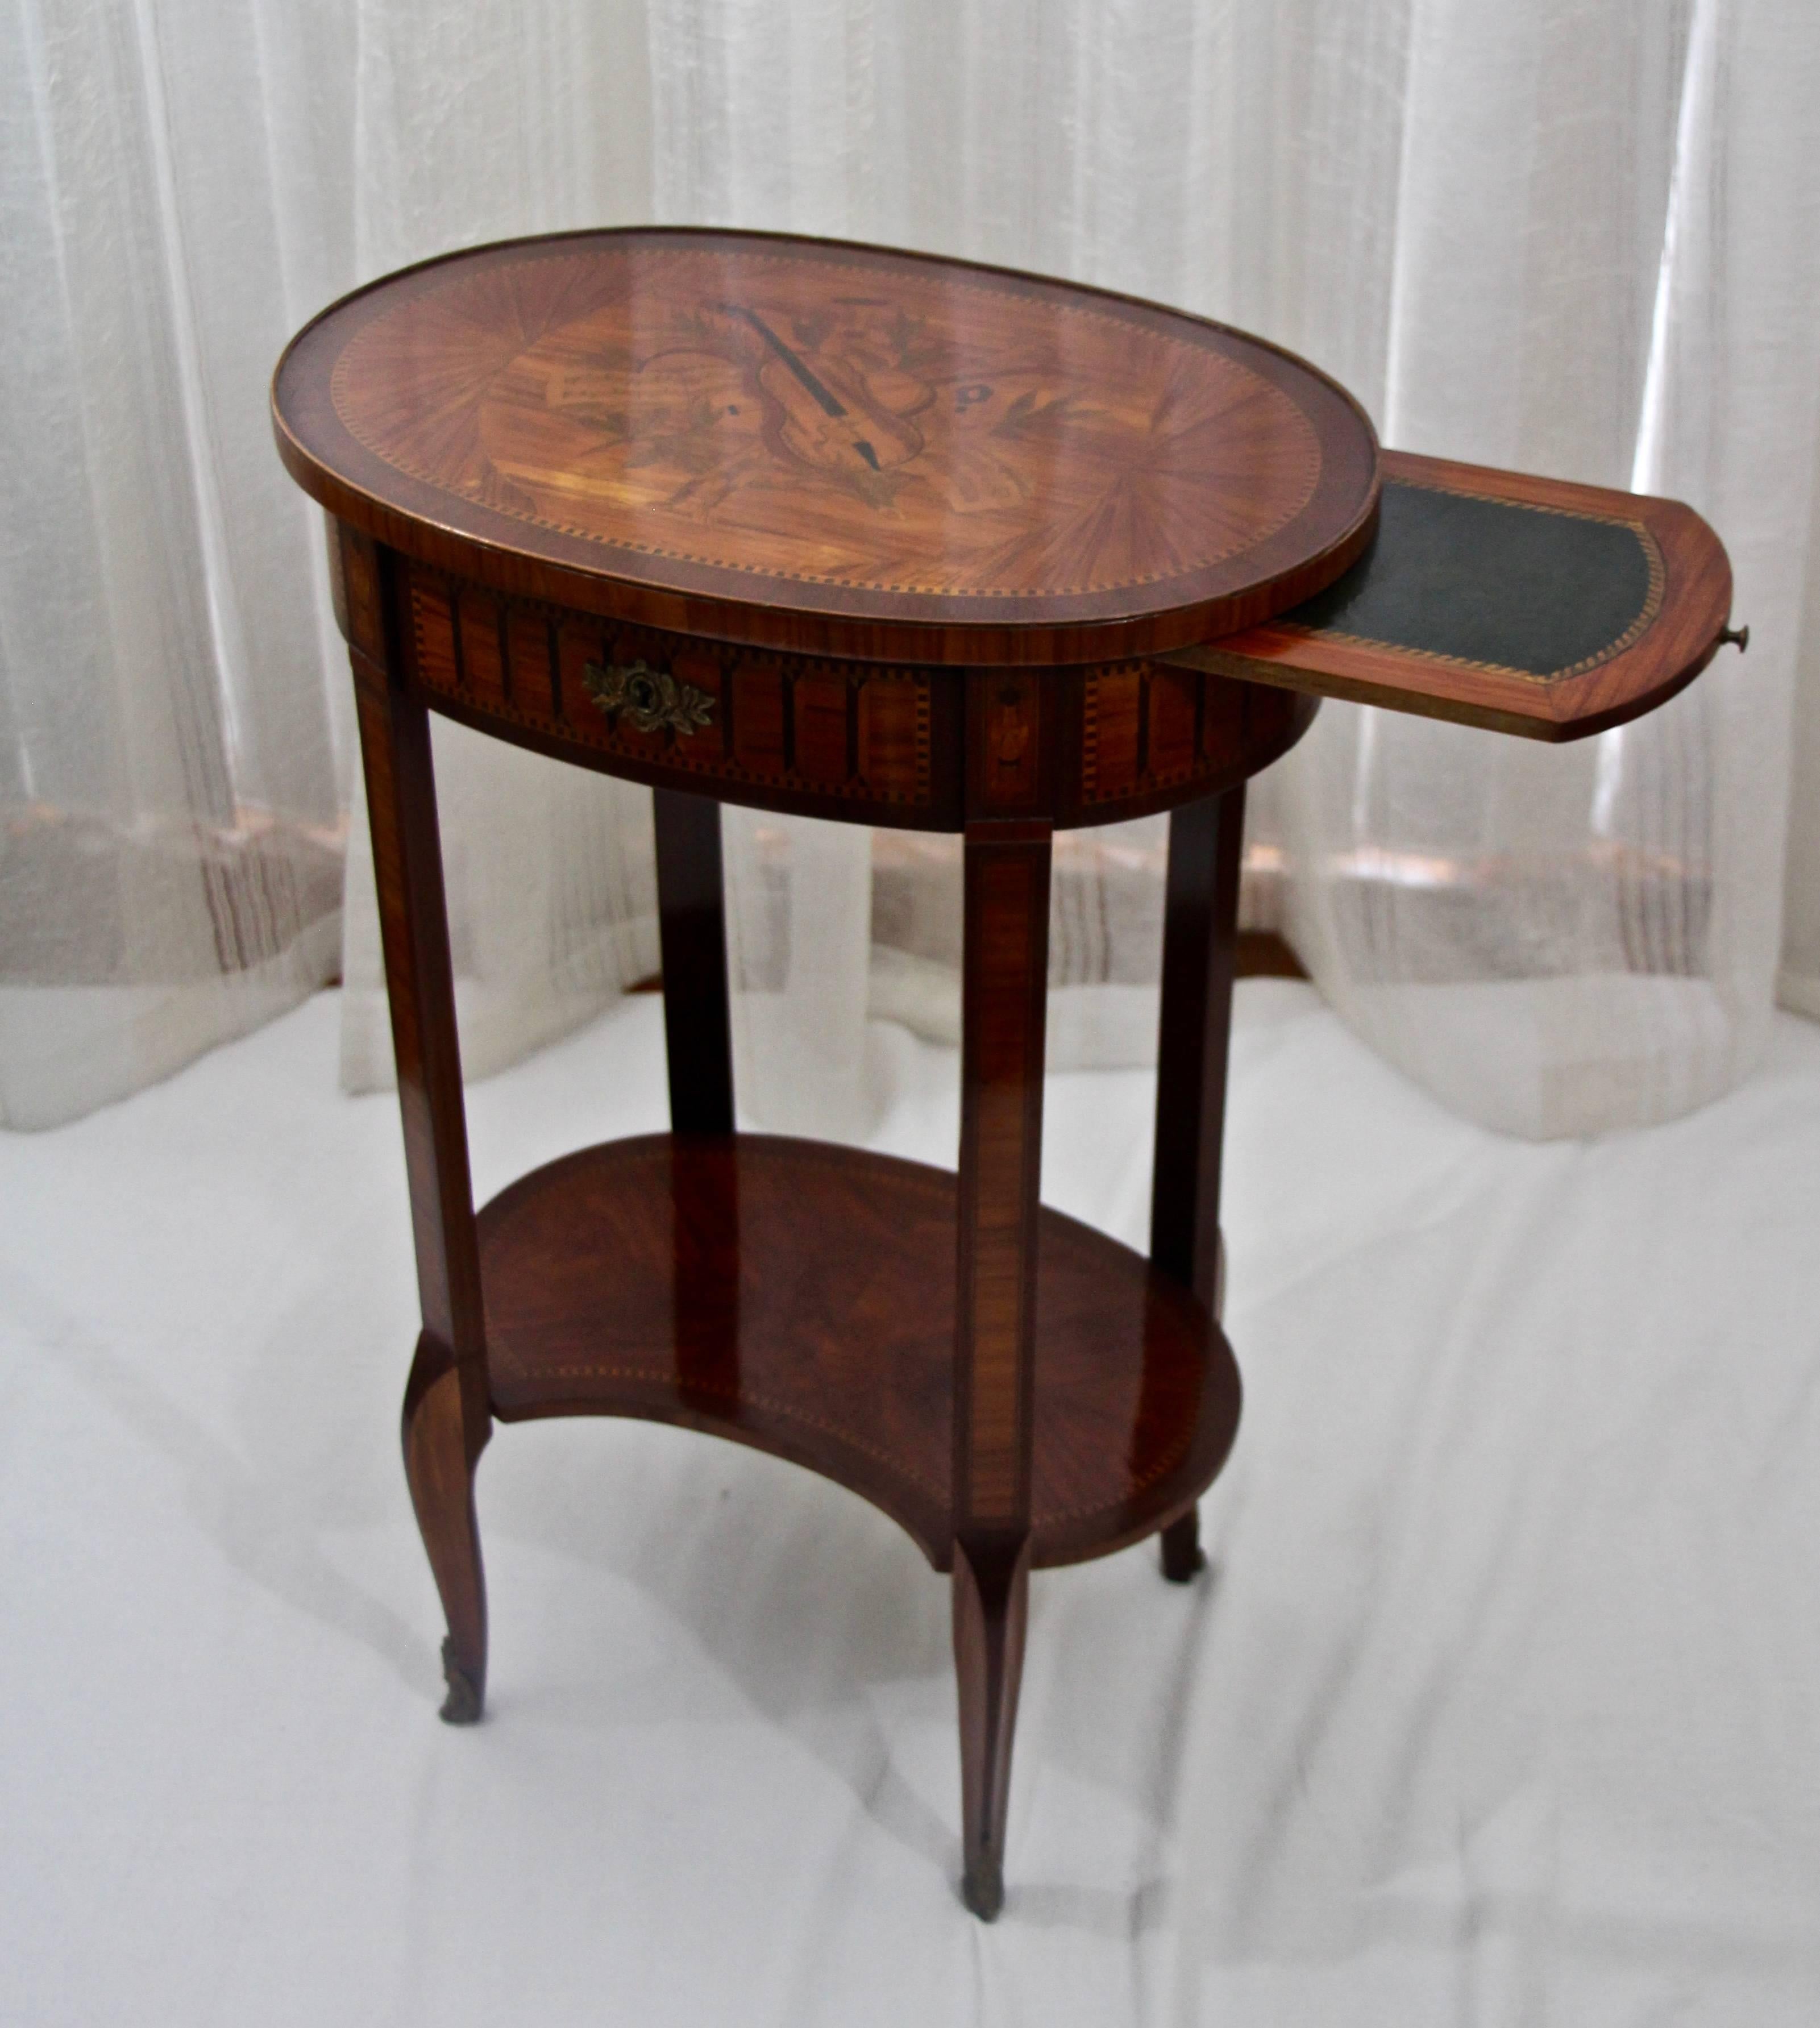 Marquetry Louis XVI Side Table, France around 1800